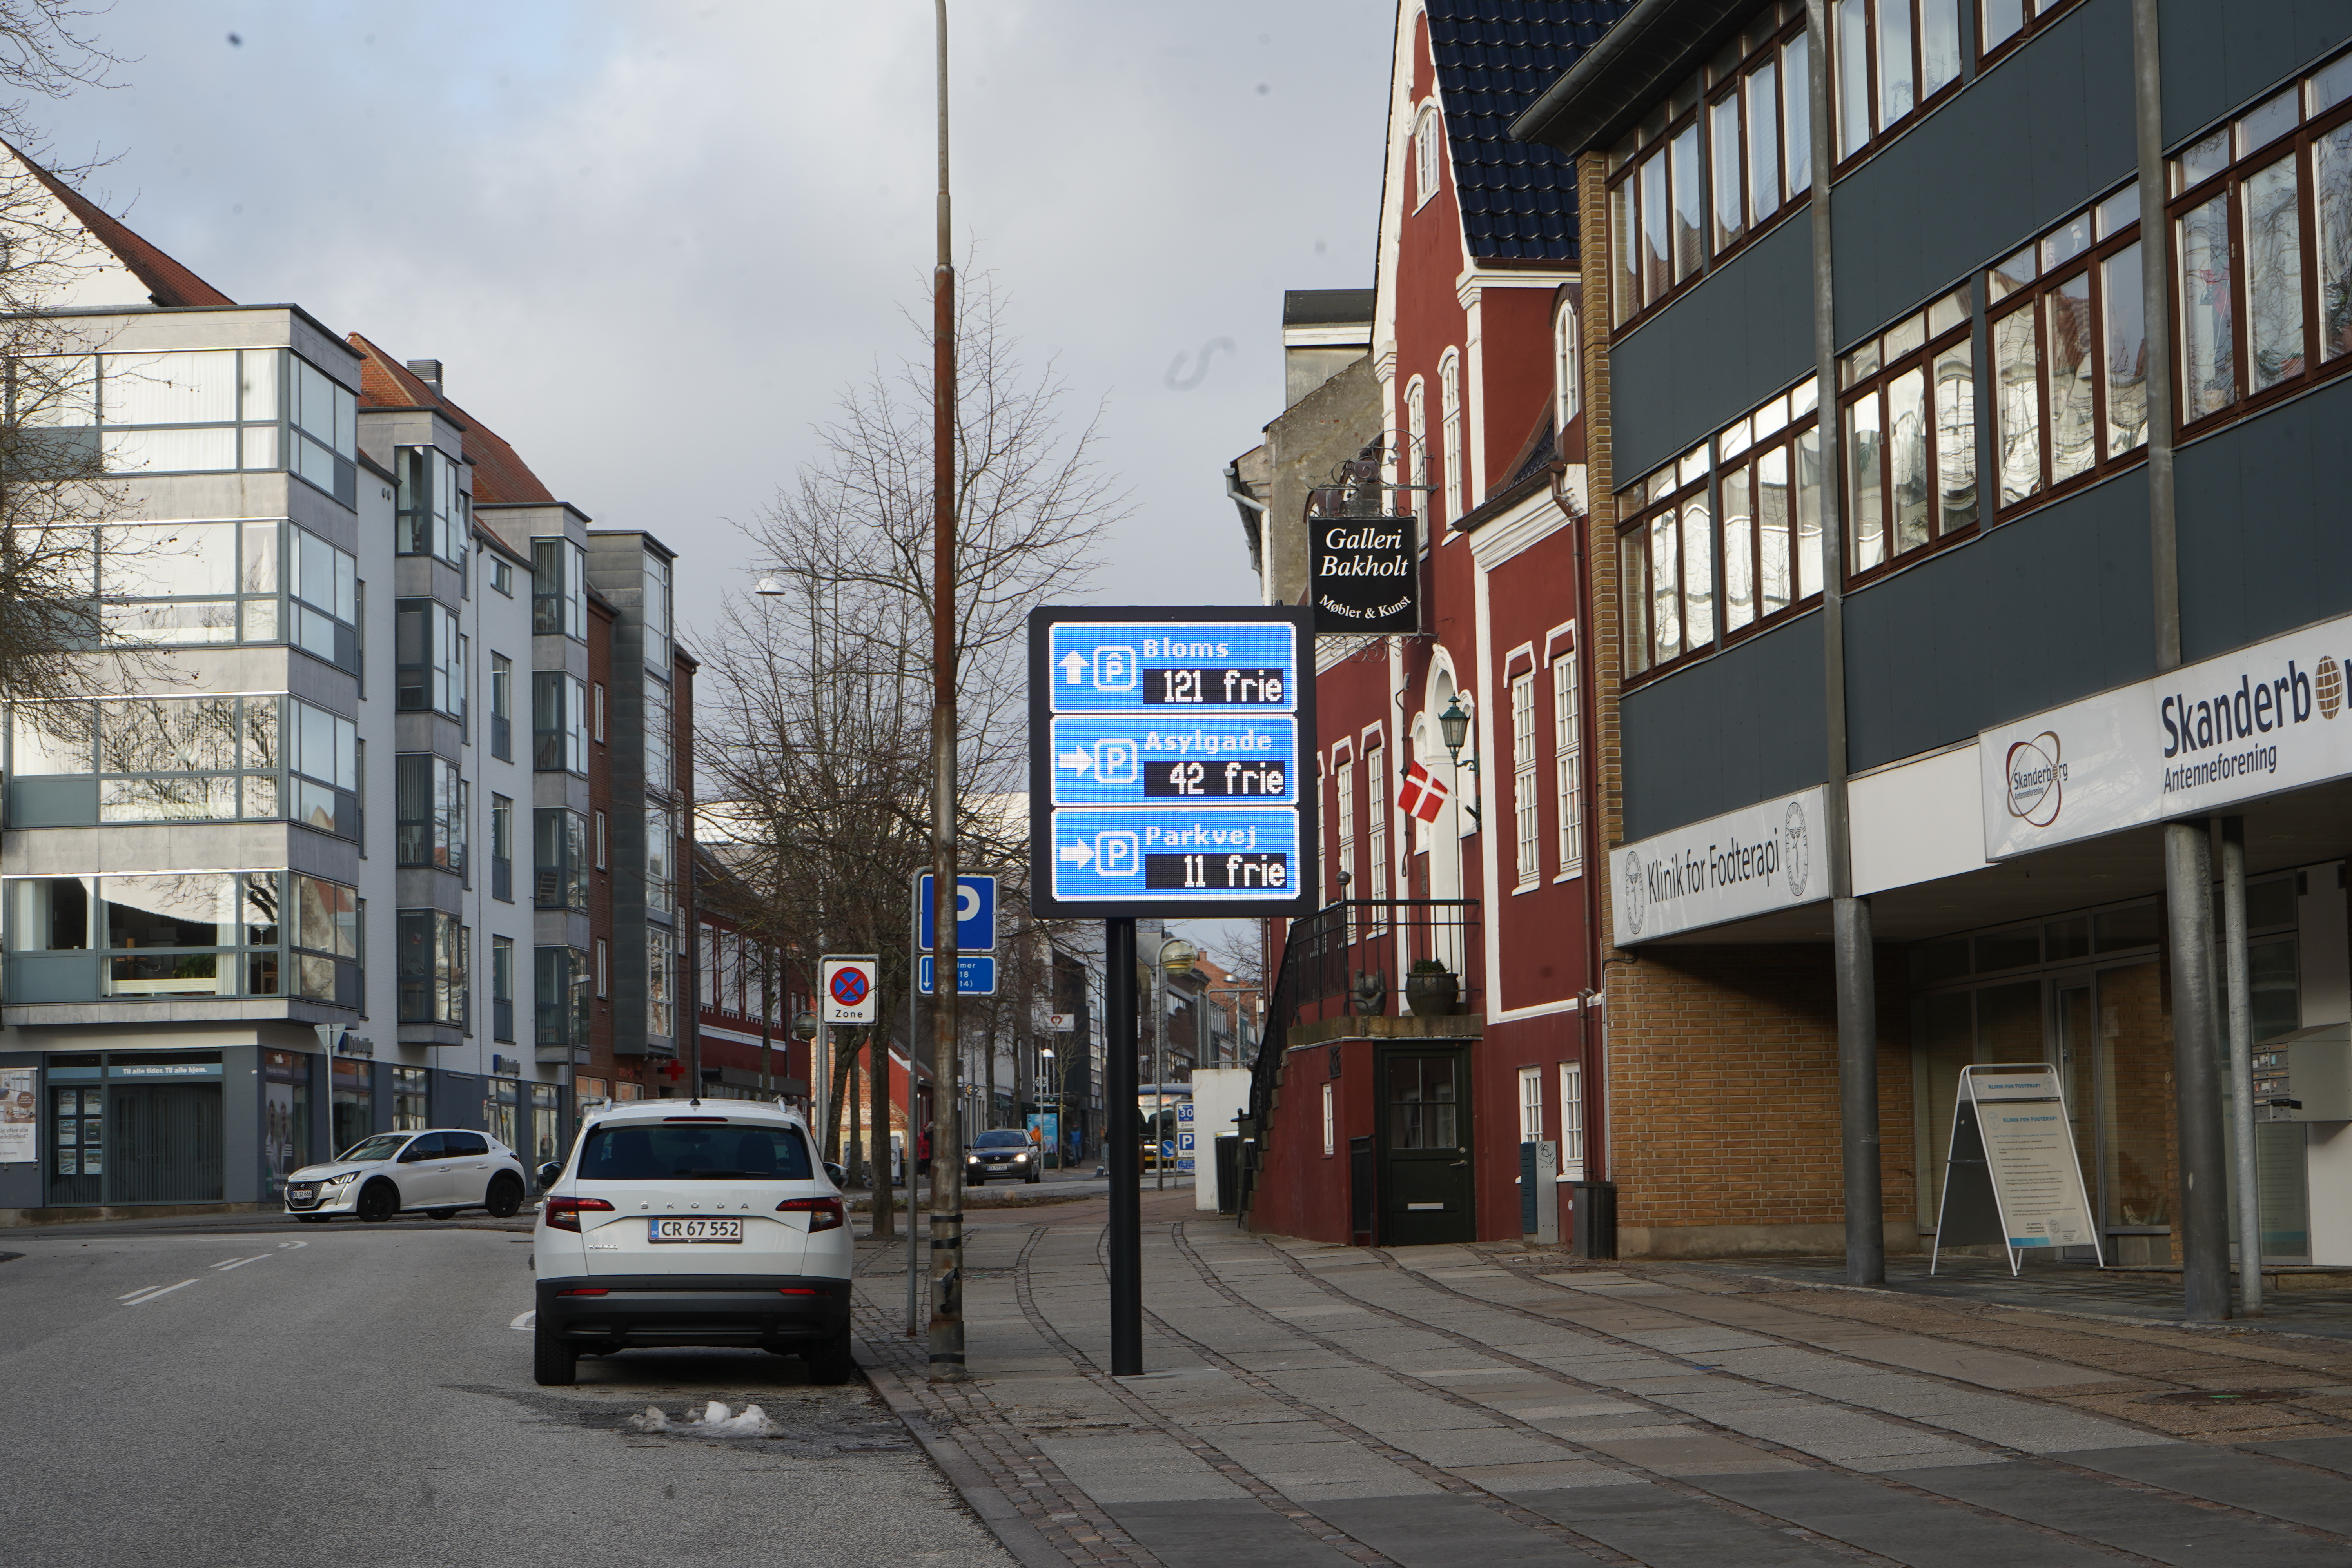 Skanderborg – Denmark takes a step towards the future with its innovative parking guidance project with the assistance of Urbiotica 